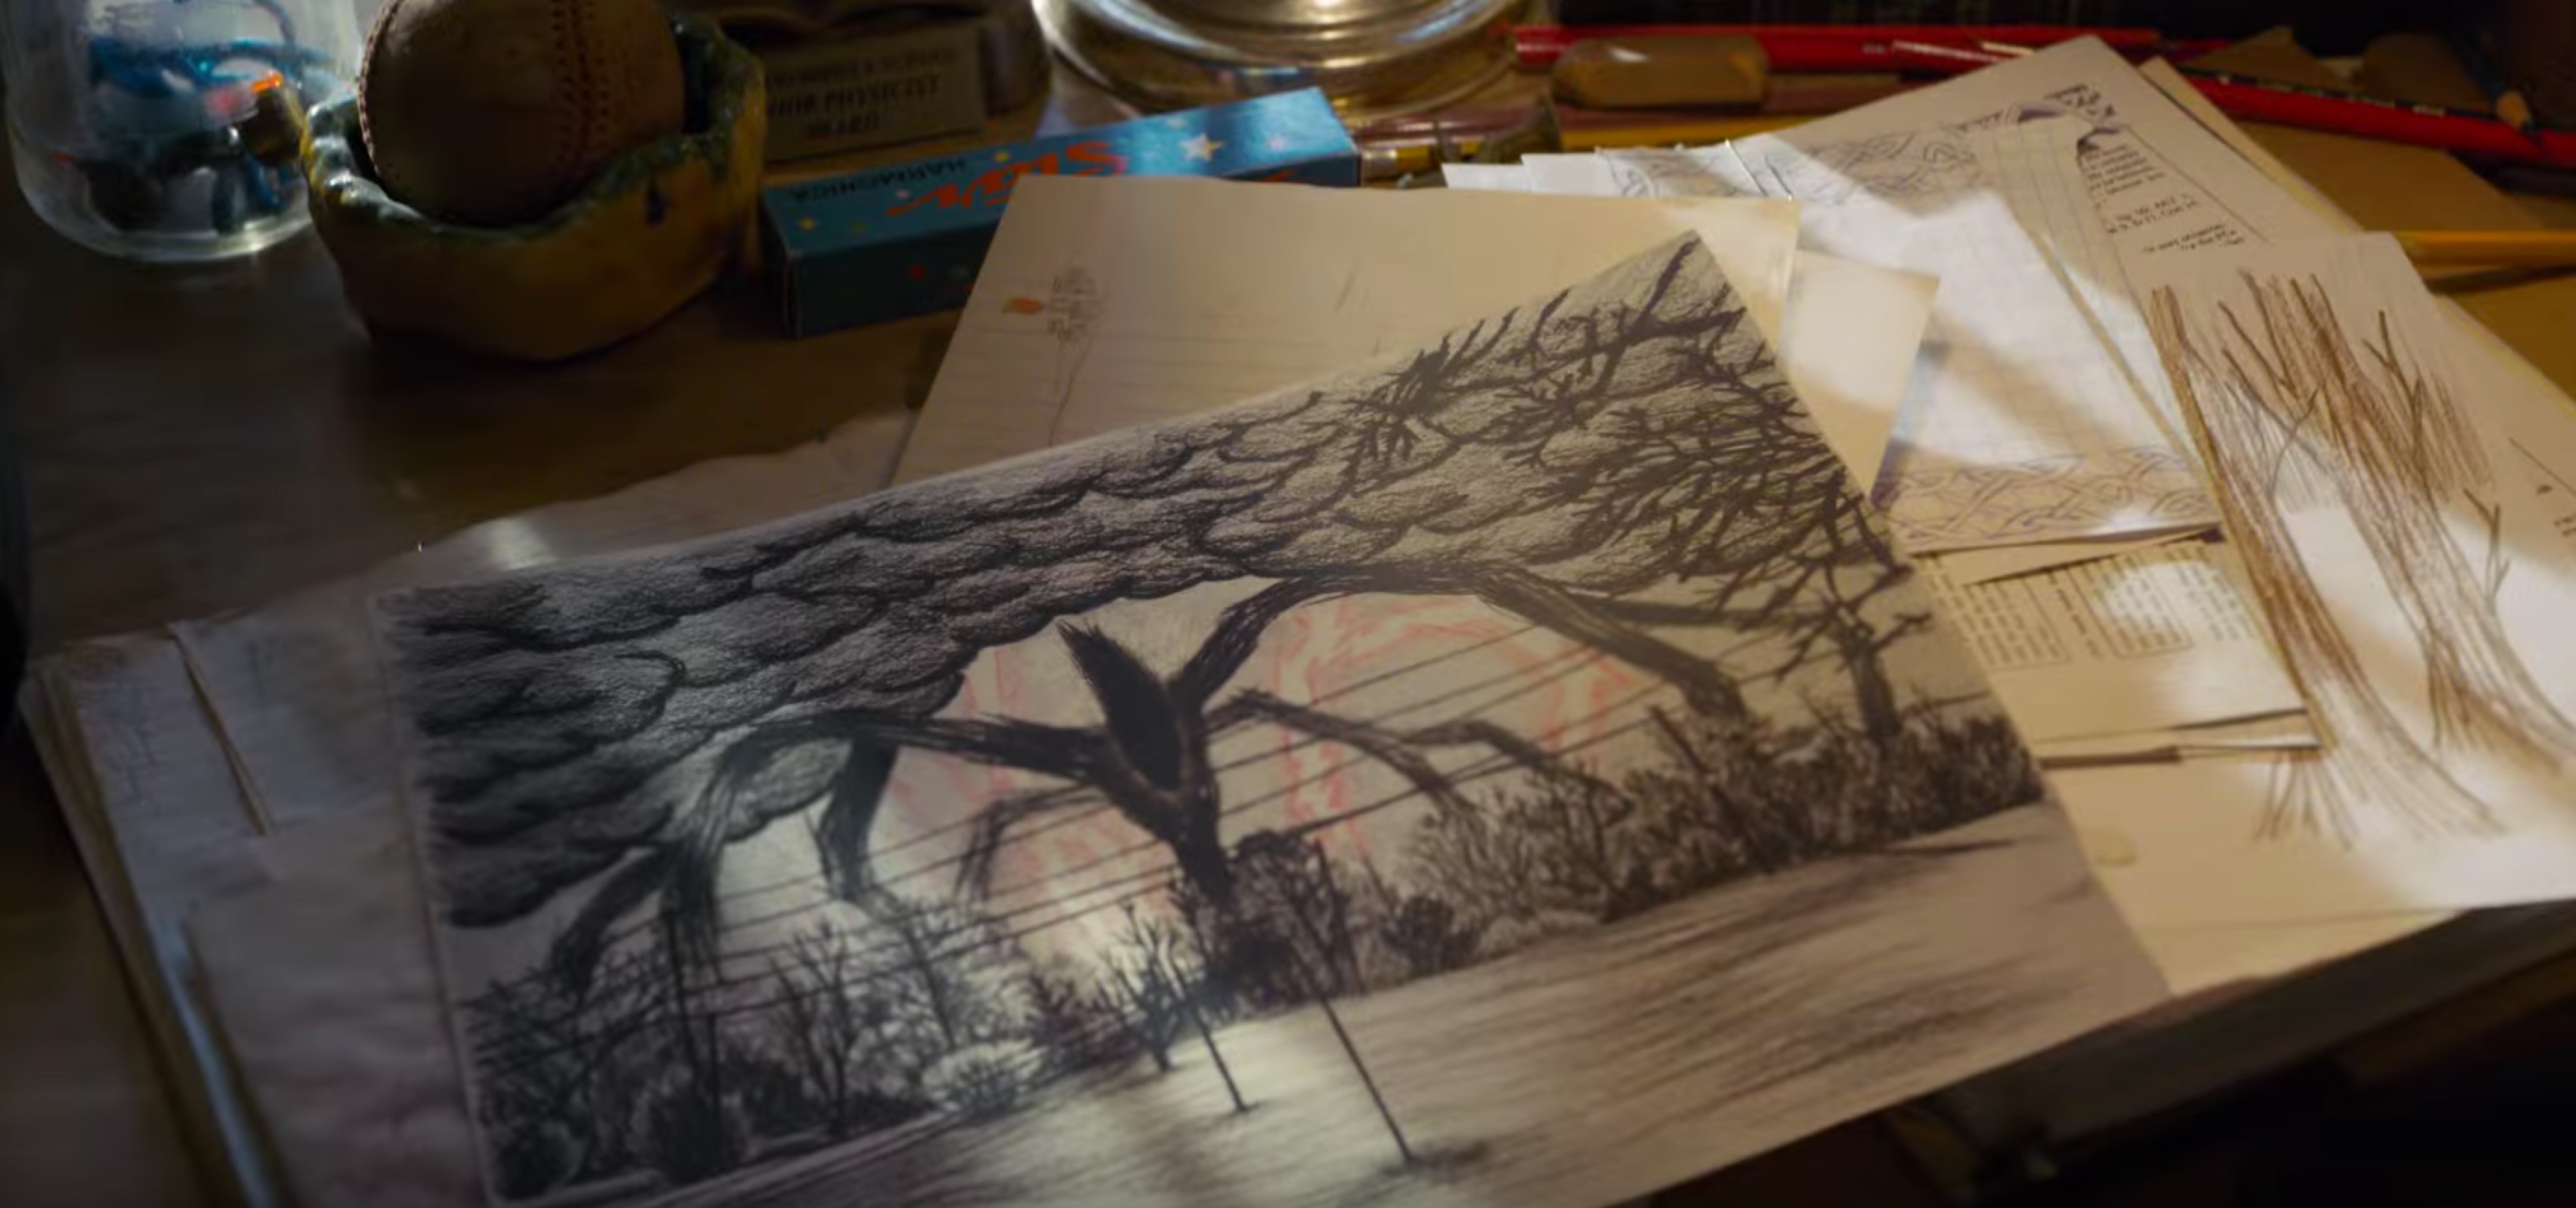 stranger-things-ravenloft-connection-hinted-at-in-super-bowl-spot